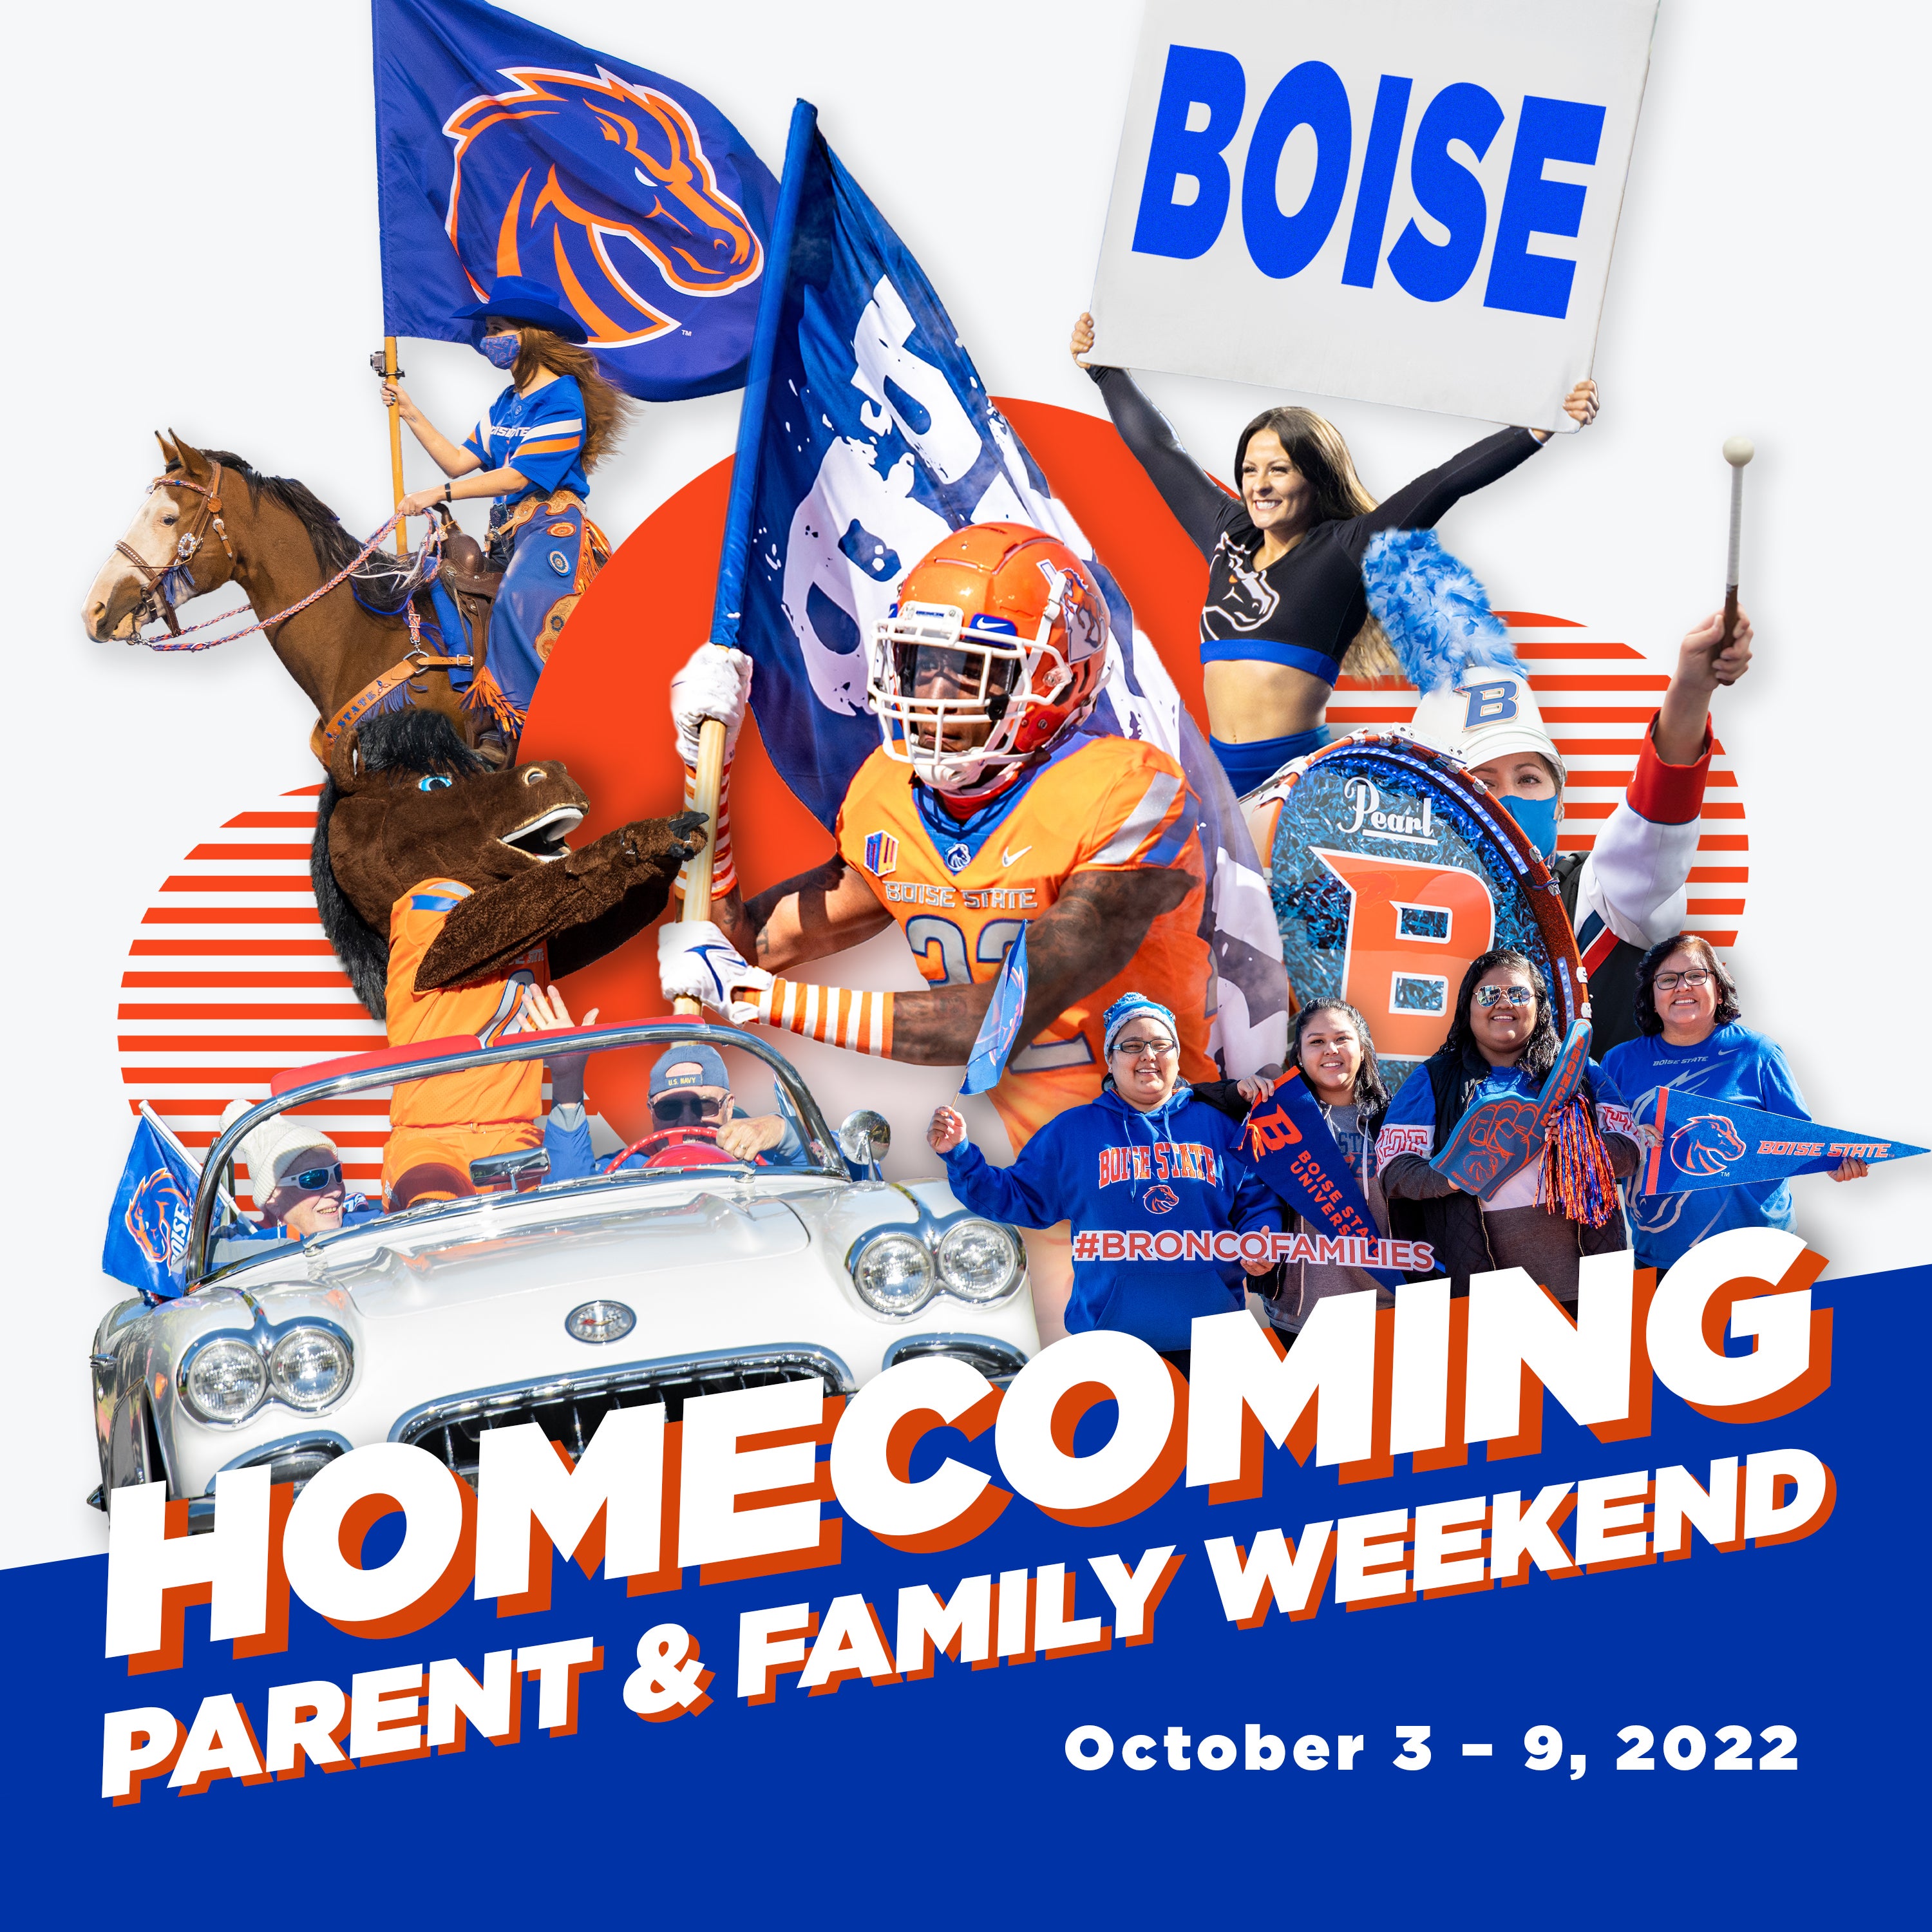 Homecoming Parent and Family Weekend, Oct 3-9, 2022 